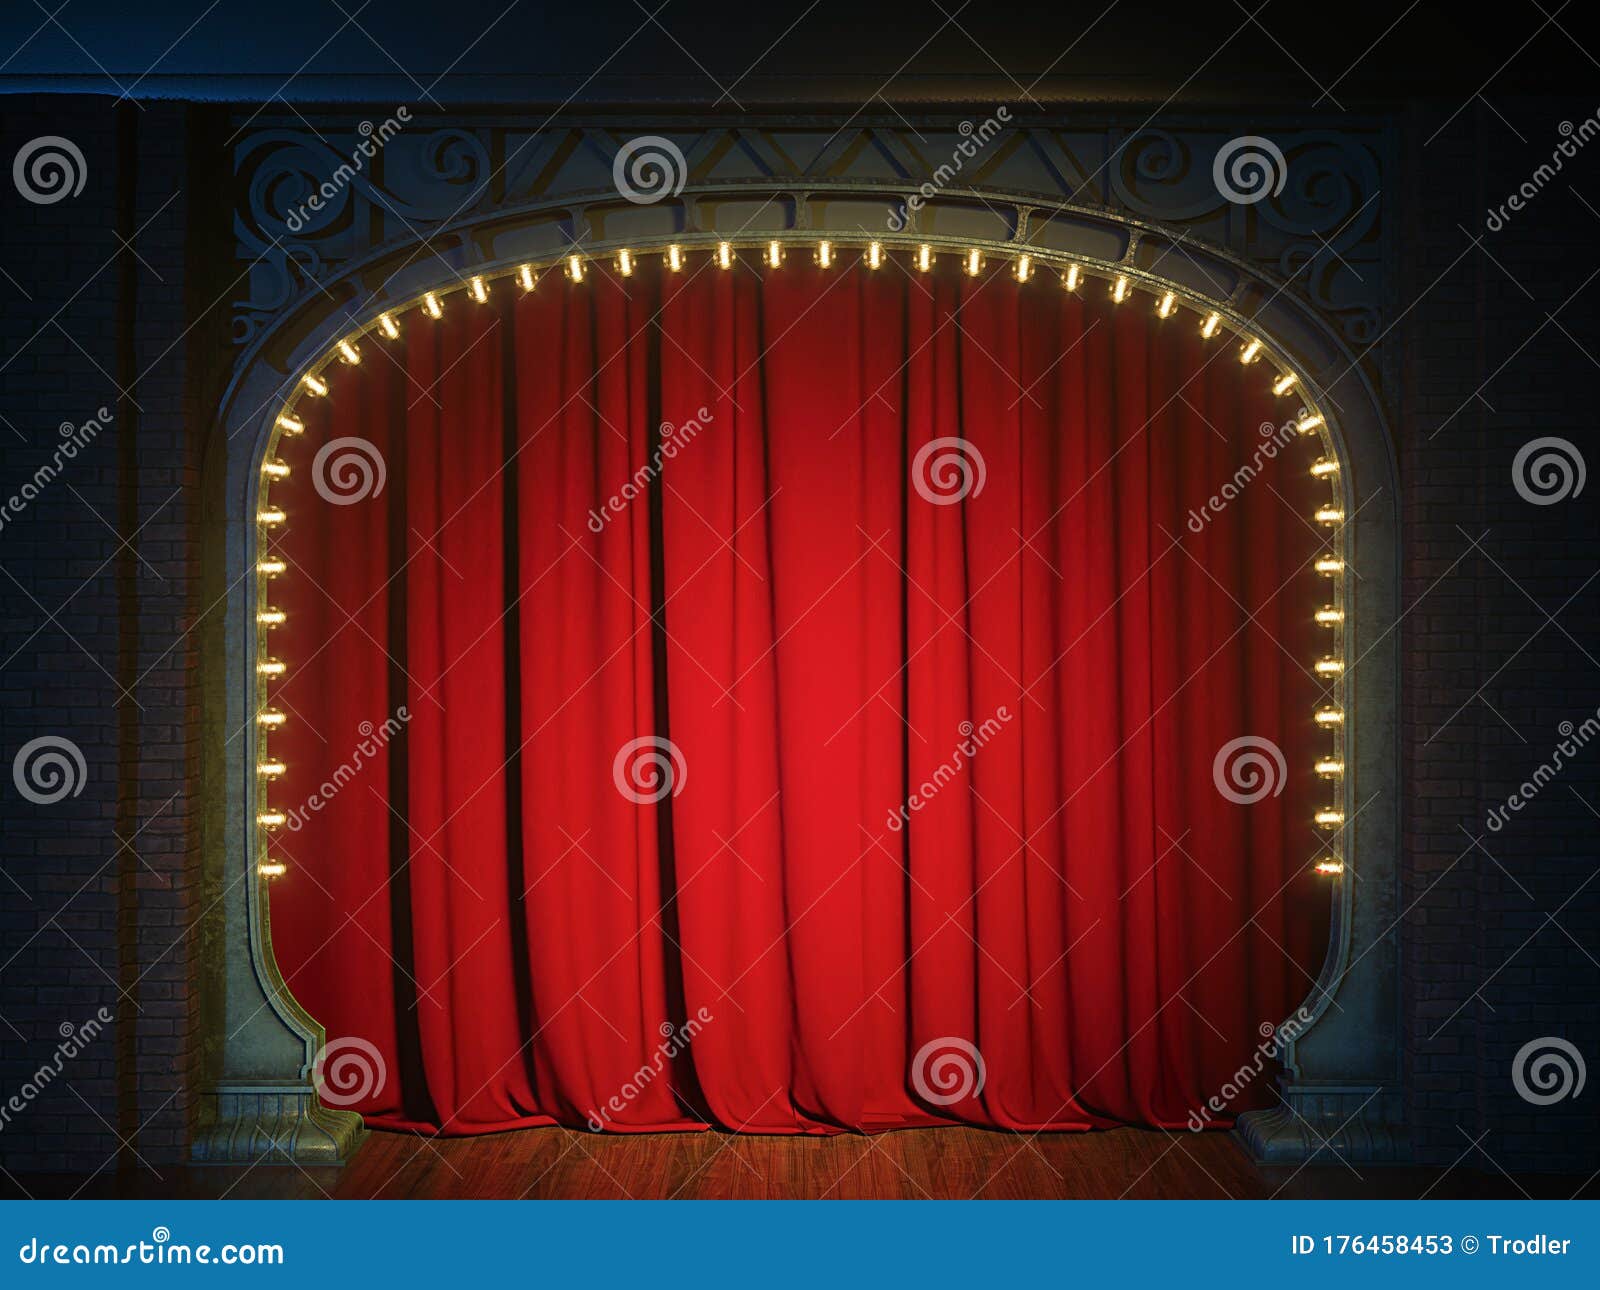 Dark Empty Cabaret or Comedy Club Stage with Red Curtain and Art Nuovo ...